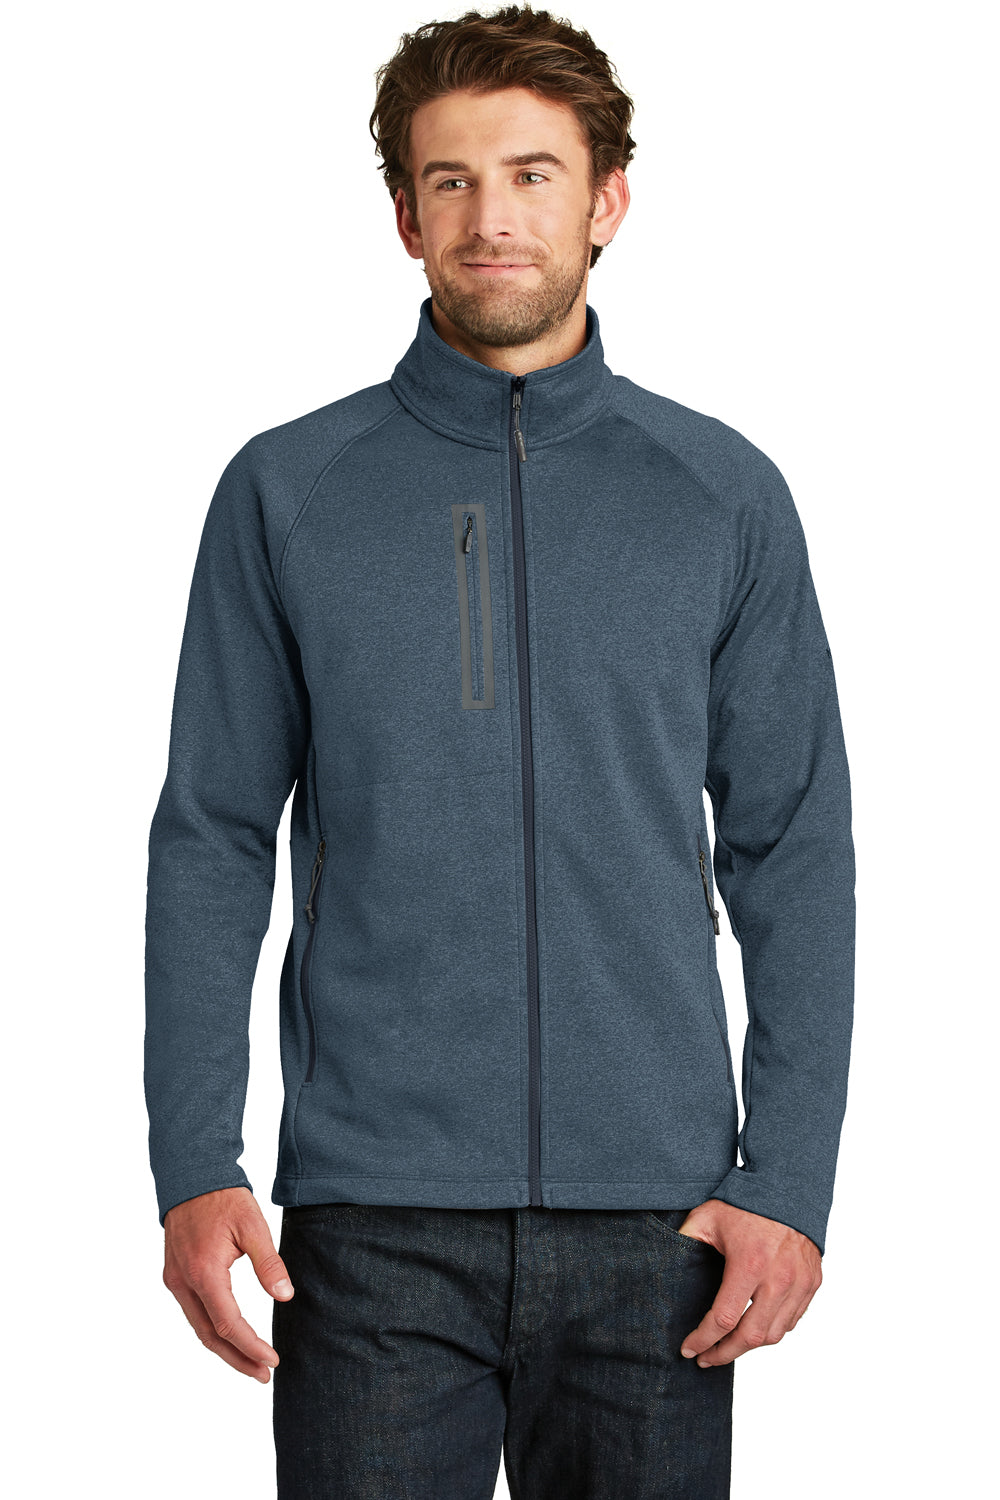 The North Face NF0A3LH9 Mens Canyon Flats Full Zip Fleece Jacket Heather Navy Blue Front